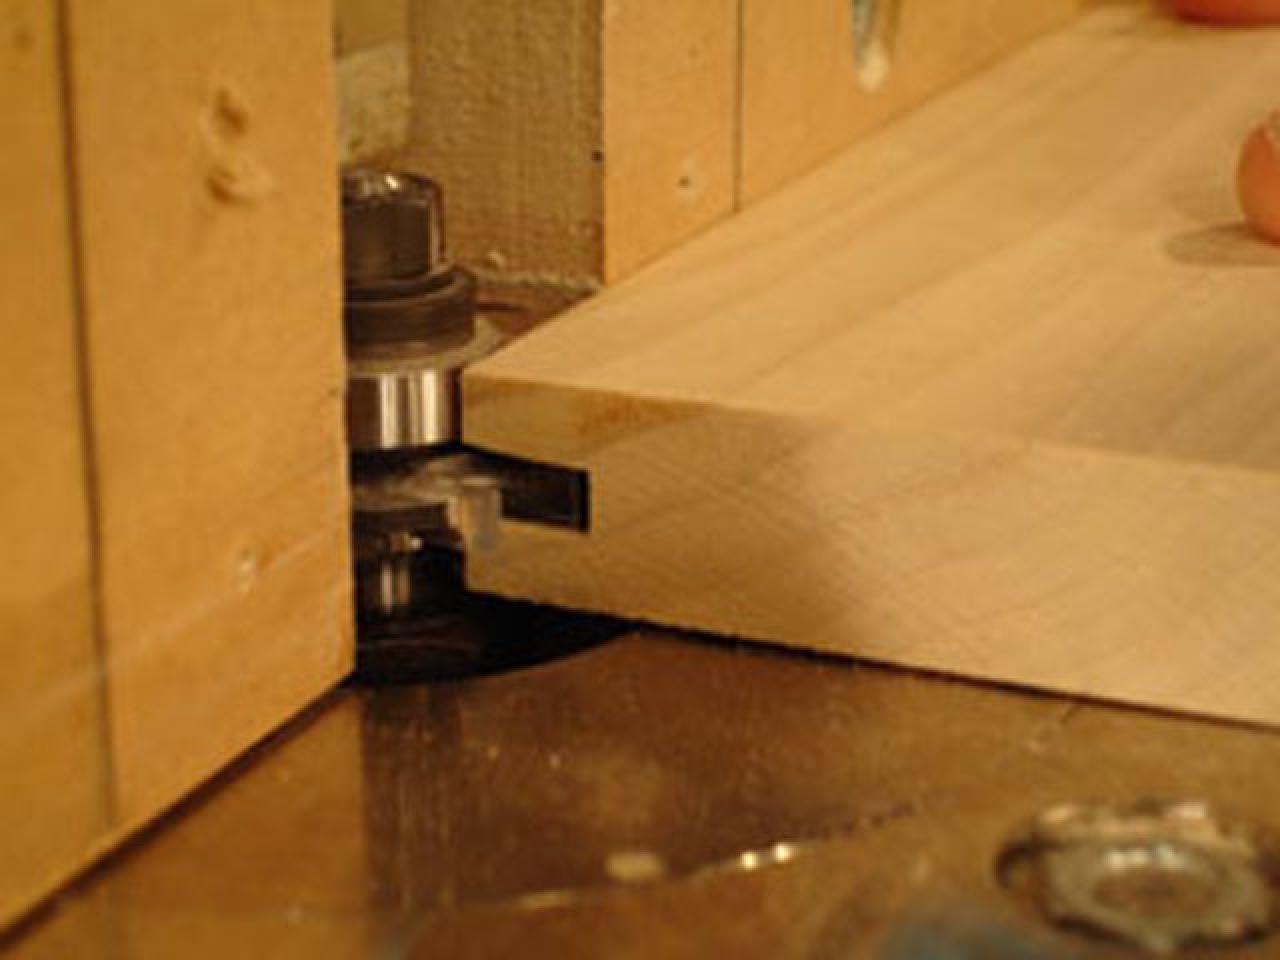 How To Cut Tongue And Groove Joints, Router Bit For Hardwood Floor Groove